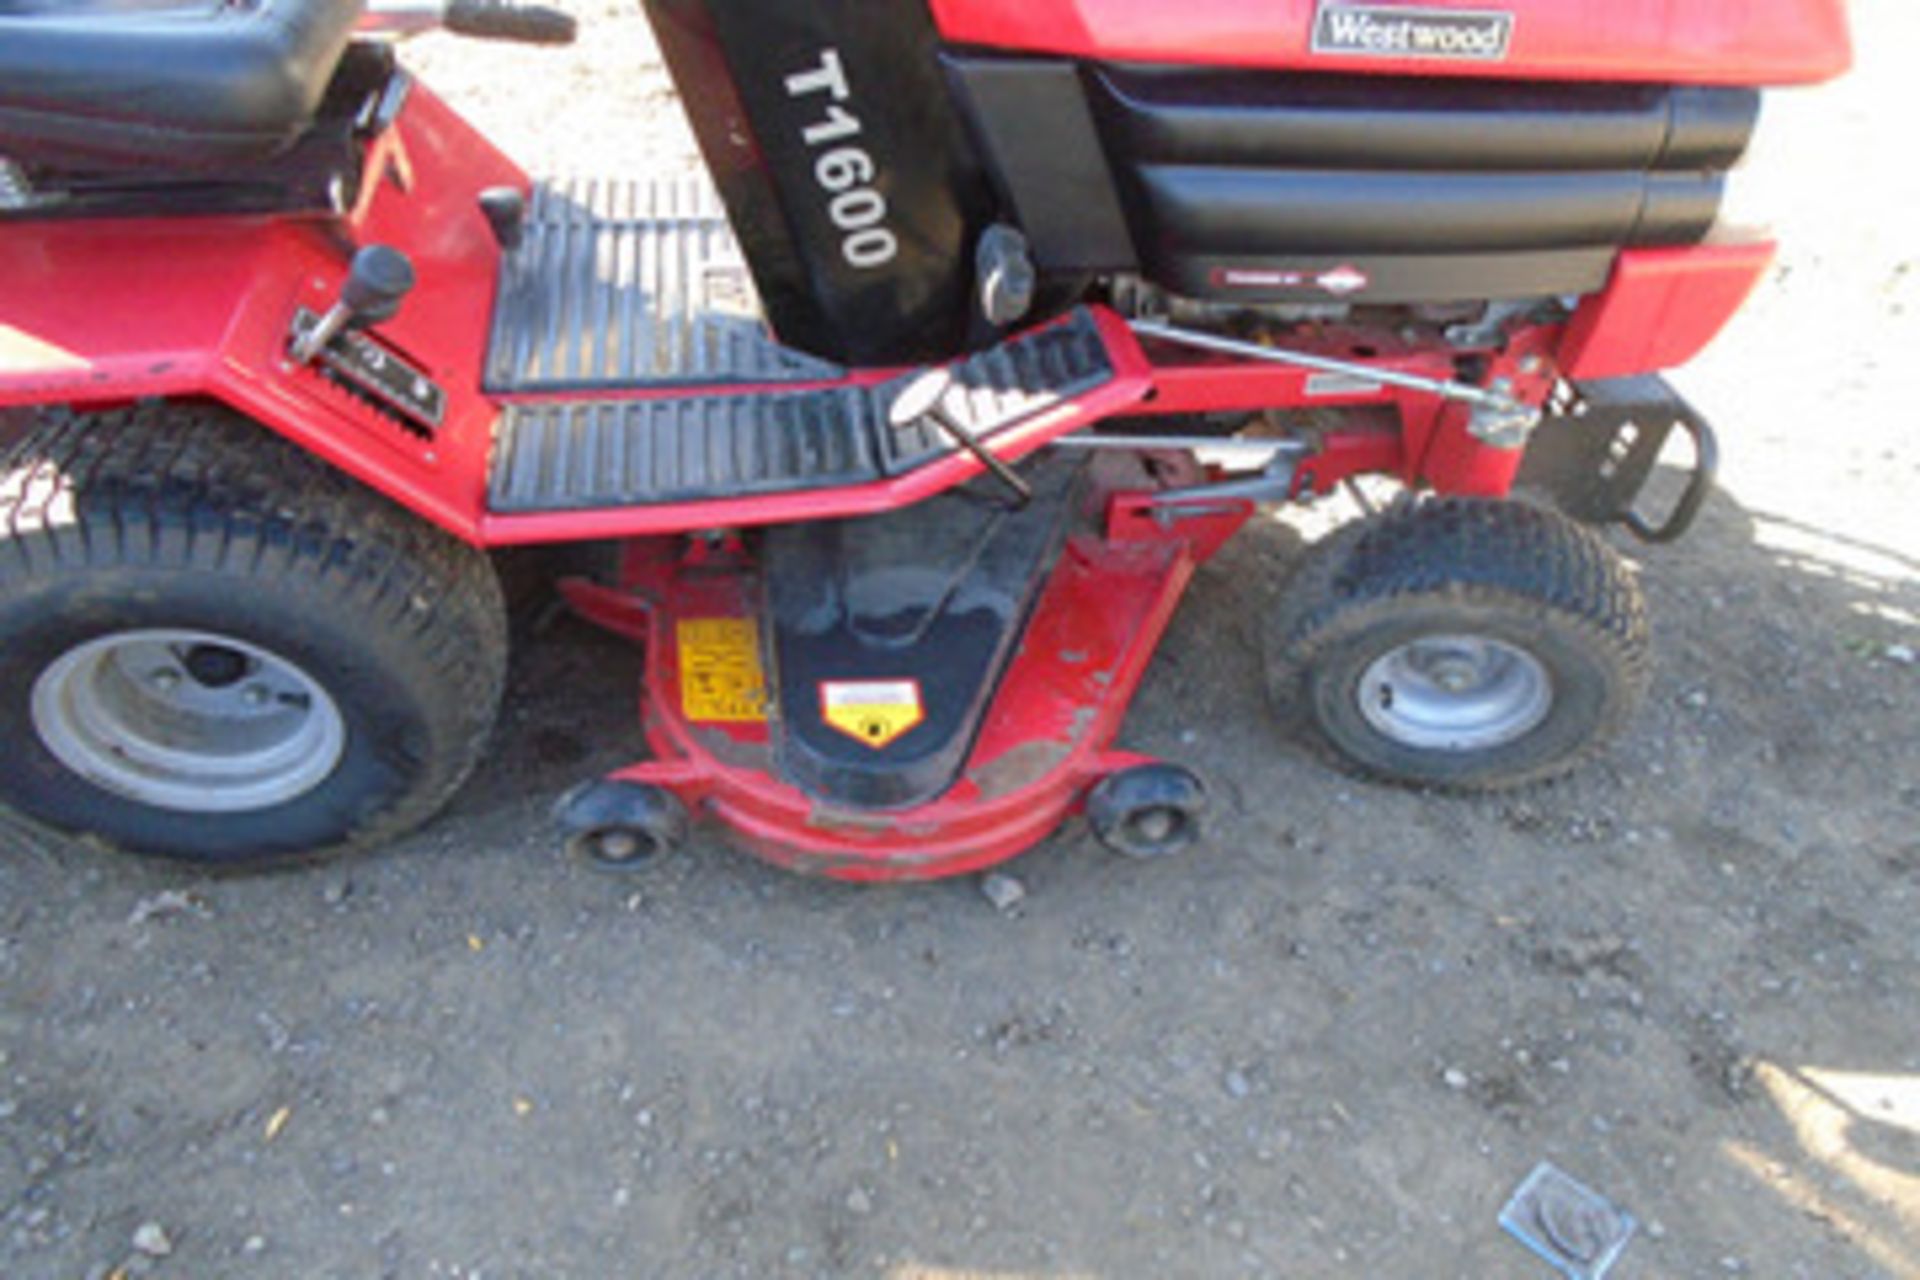 2011 Westwood T1600 ride on mower and collector, no key - Image 4 of 6